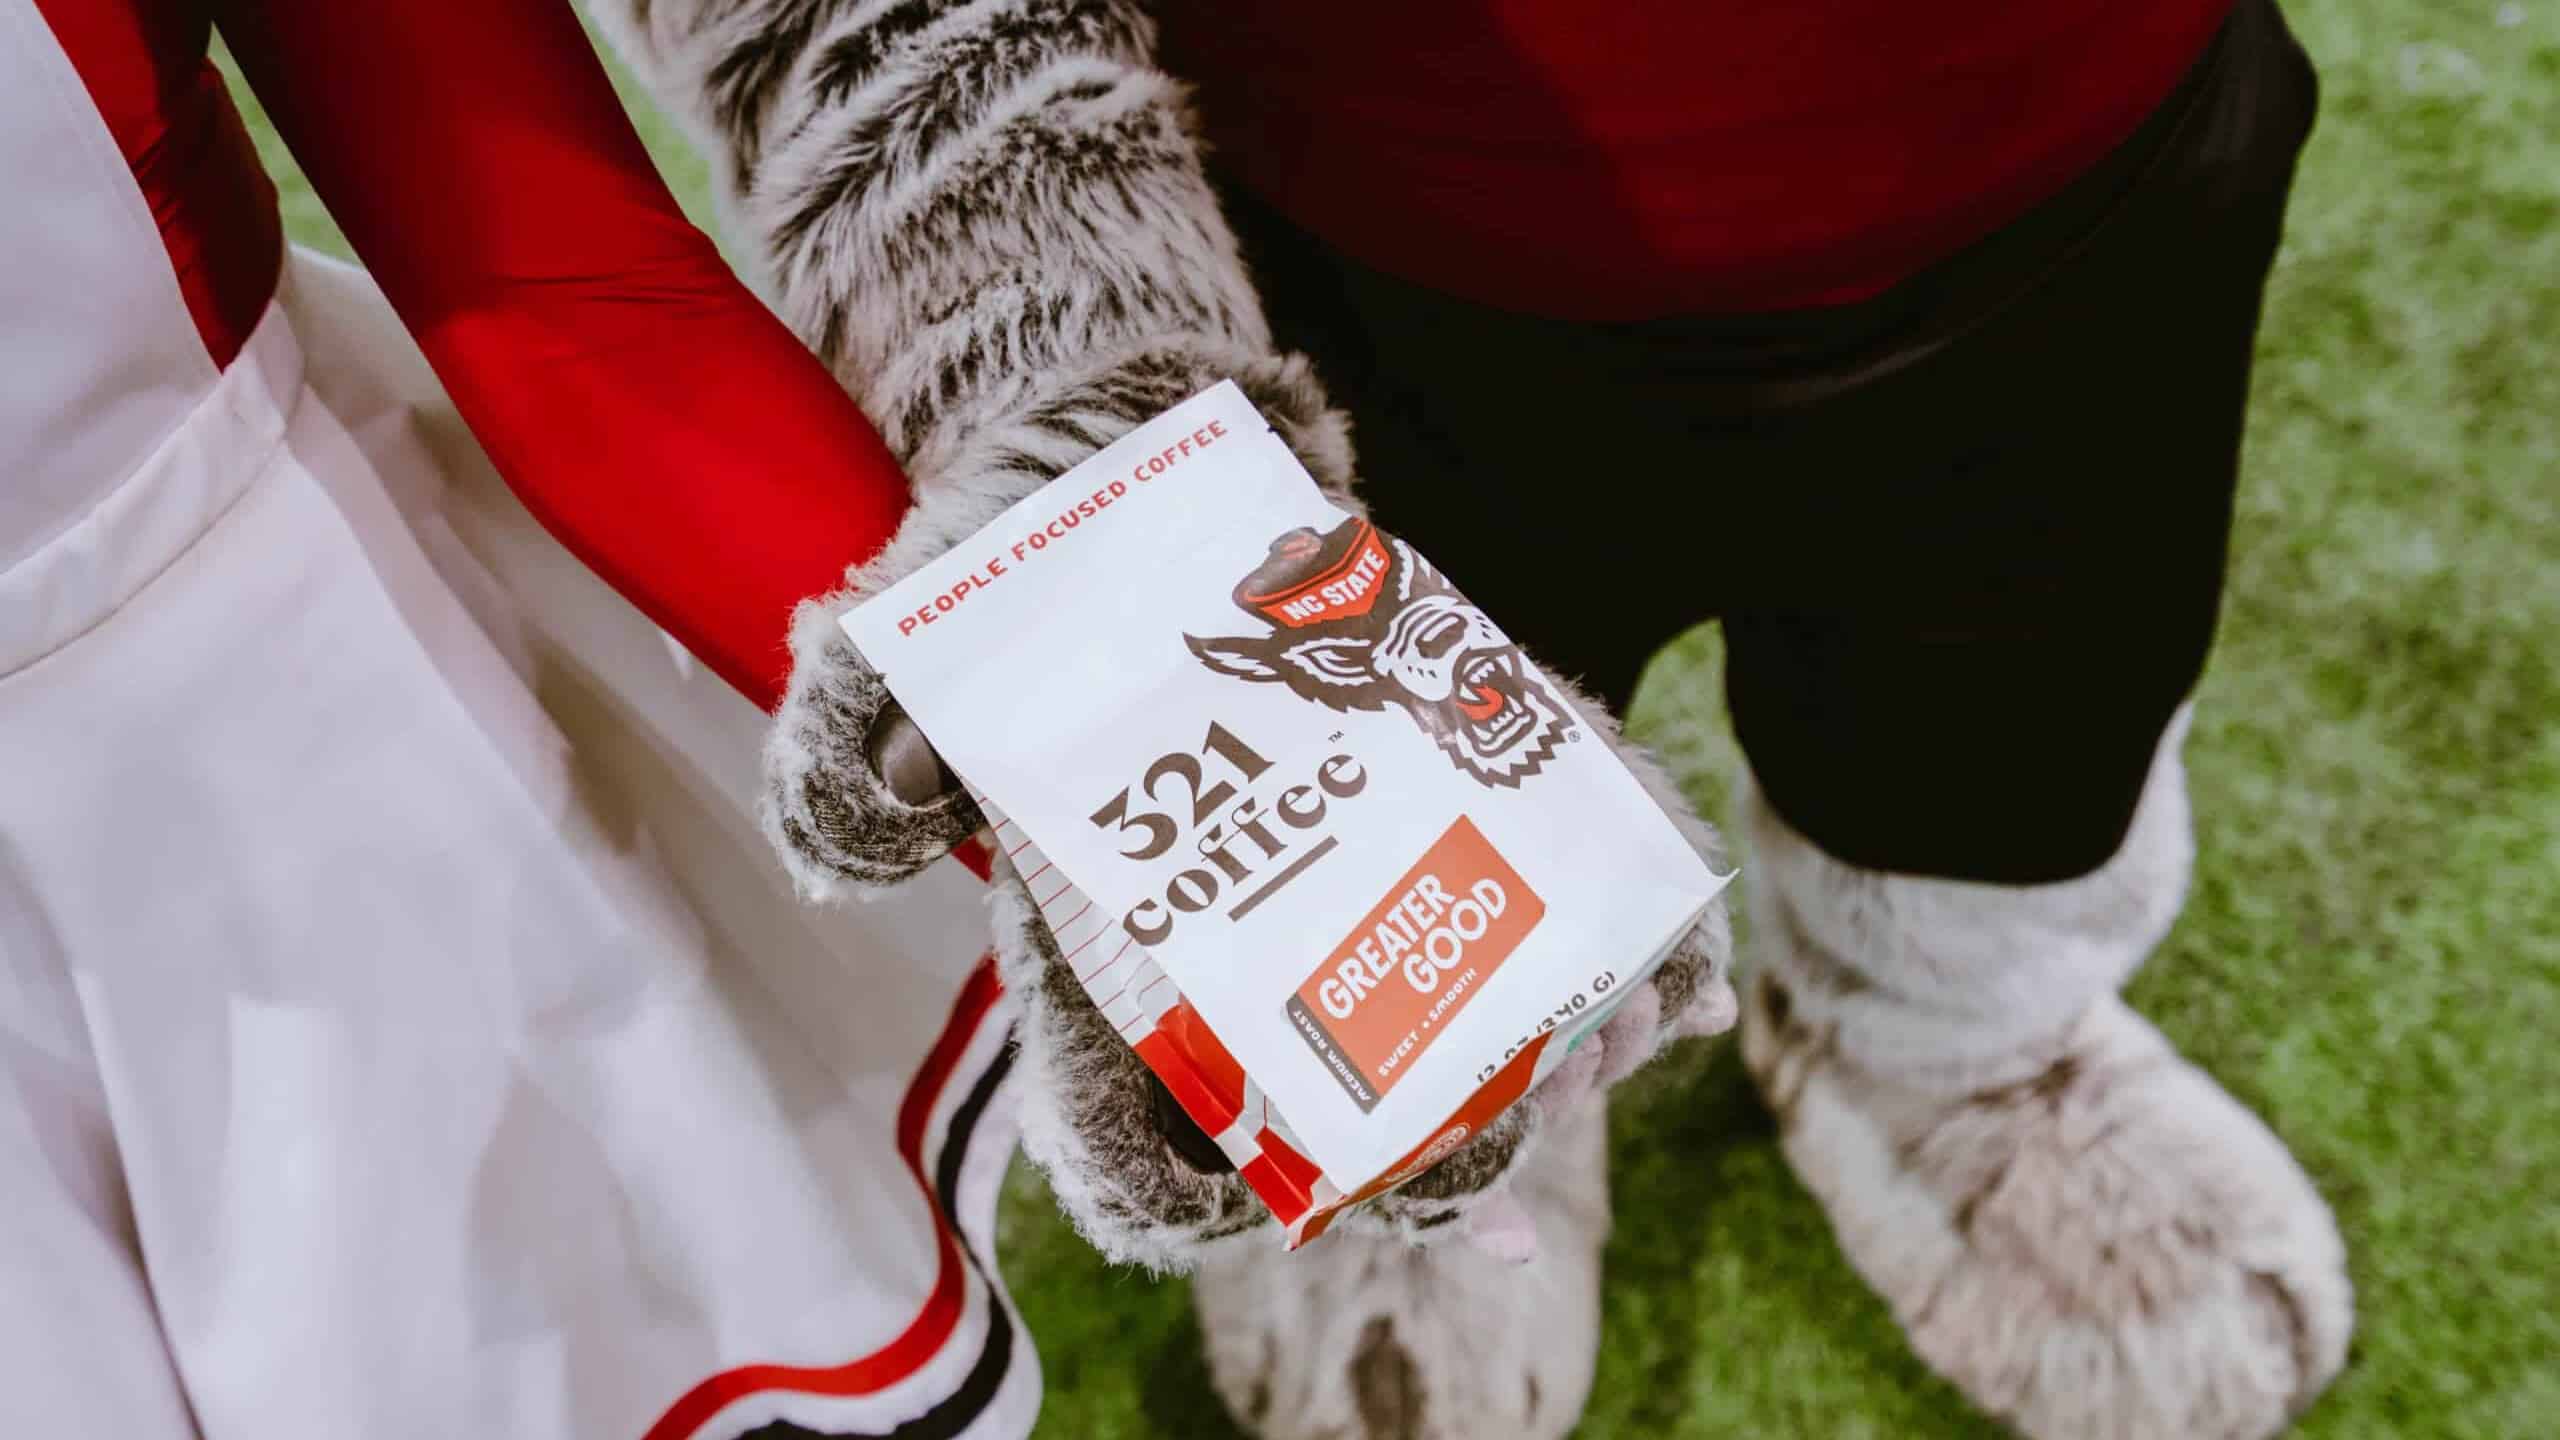 Mr. and Mrs. Wuf holding the NC State x 321 branded coffee